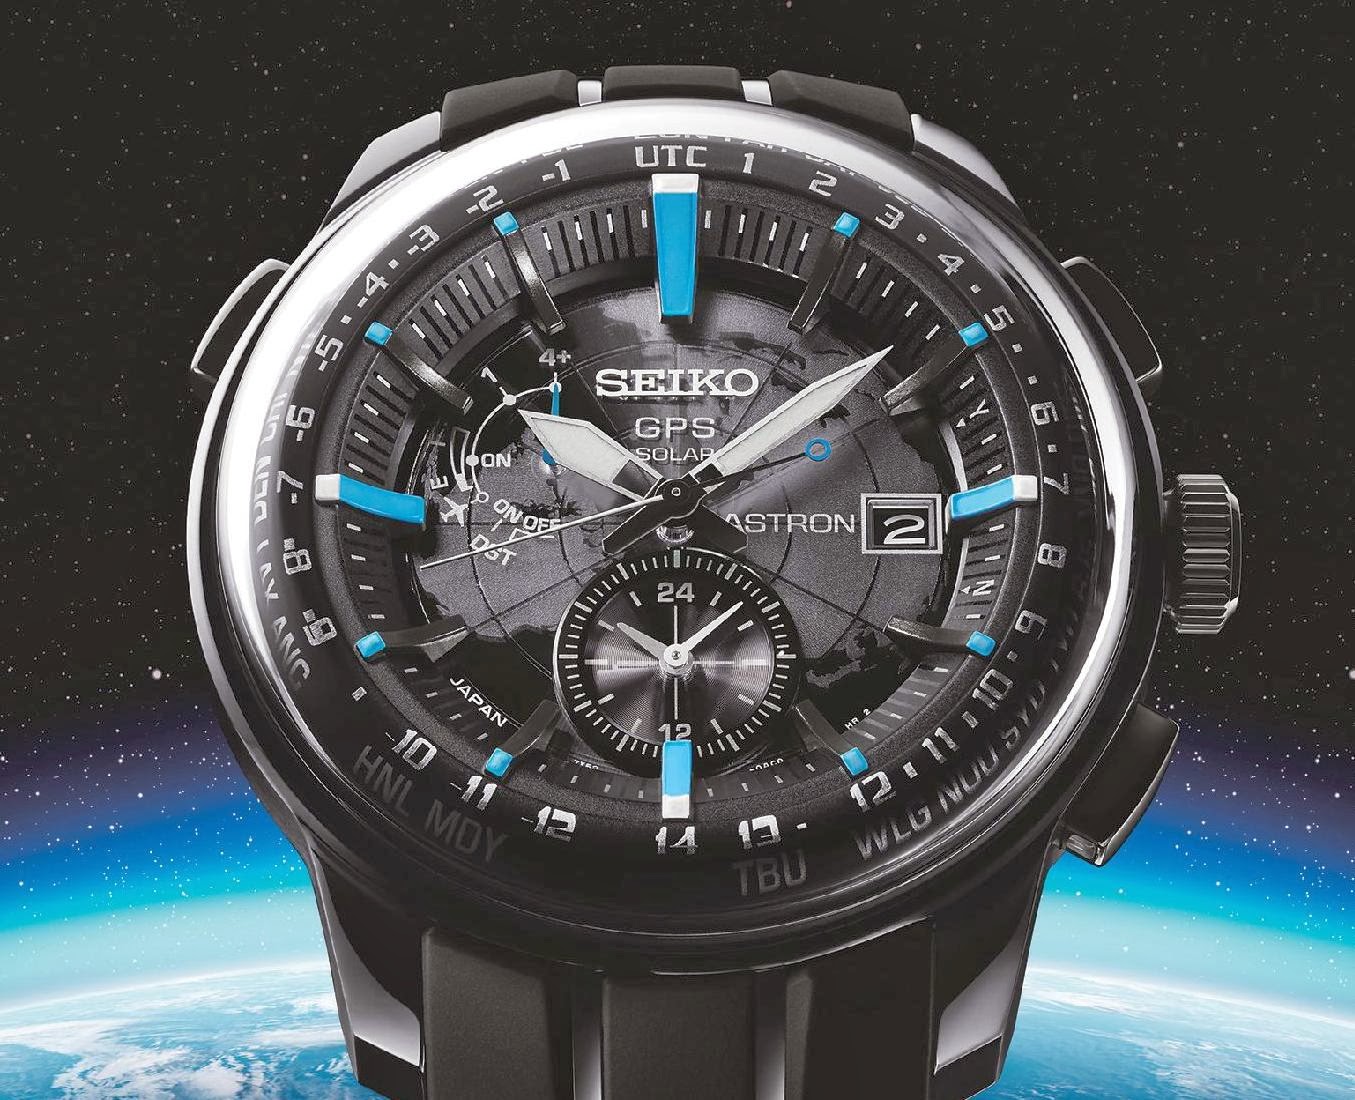 Seiko Astron GPS Solar Watch in New Design Inspired by the Curvature of the  Earth - MasterHorologer